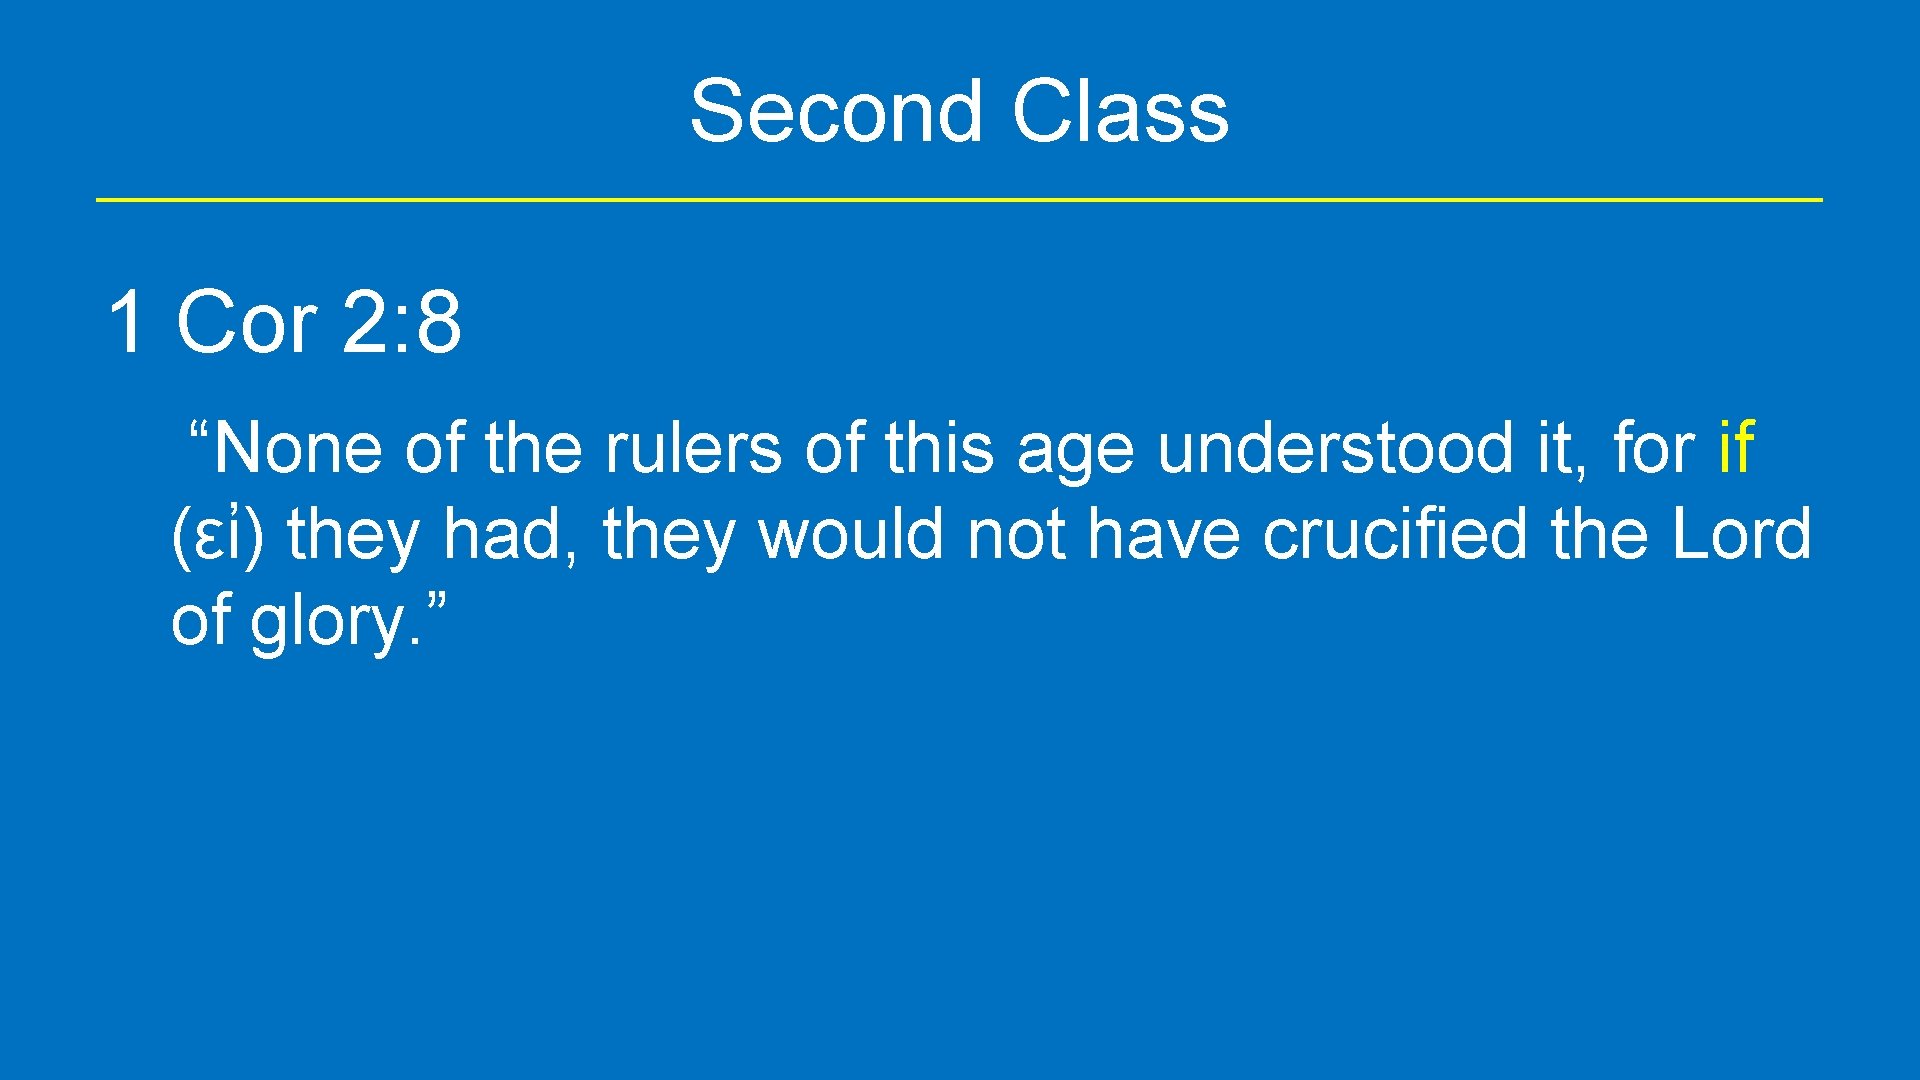 Second Class 1 Cor 2: 8 “None of the rulers of this age understood